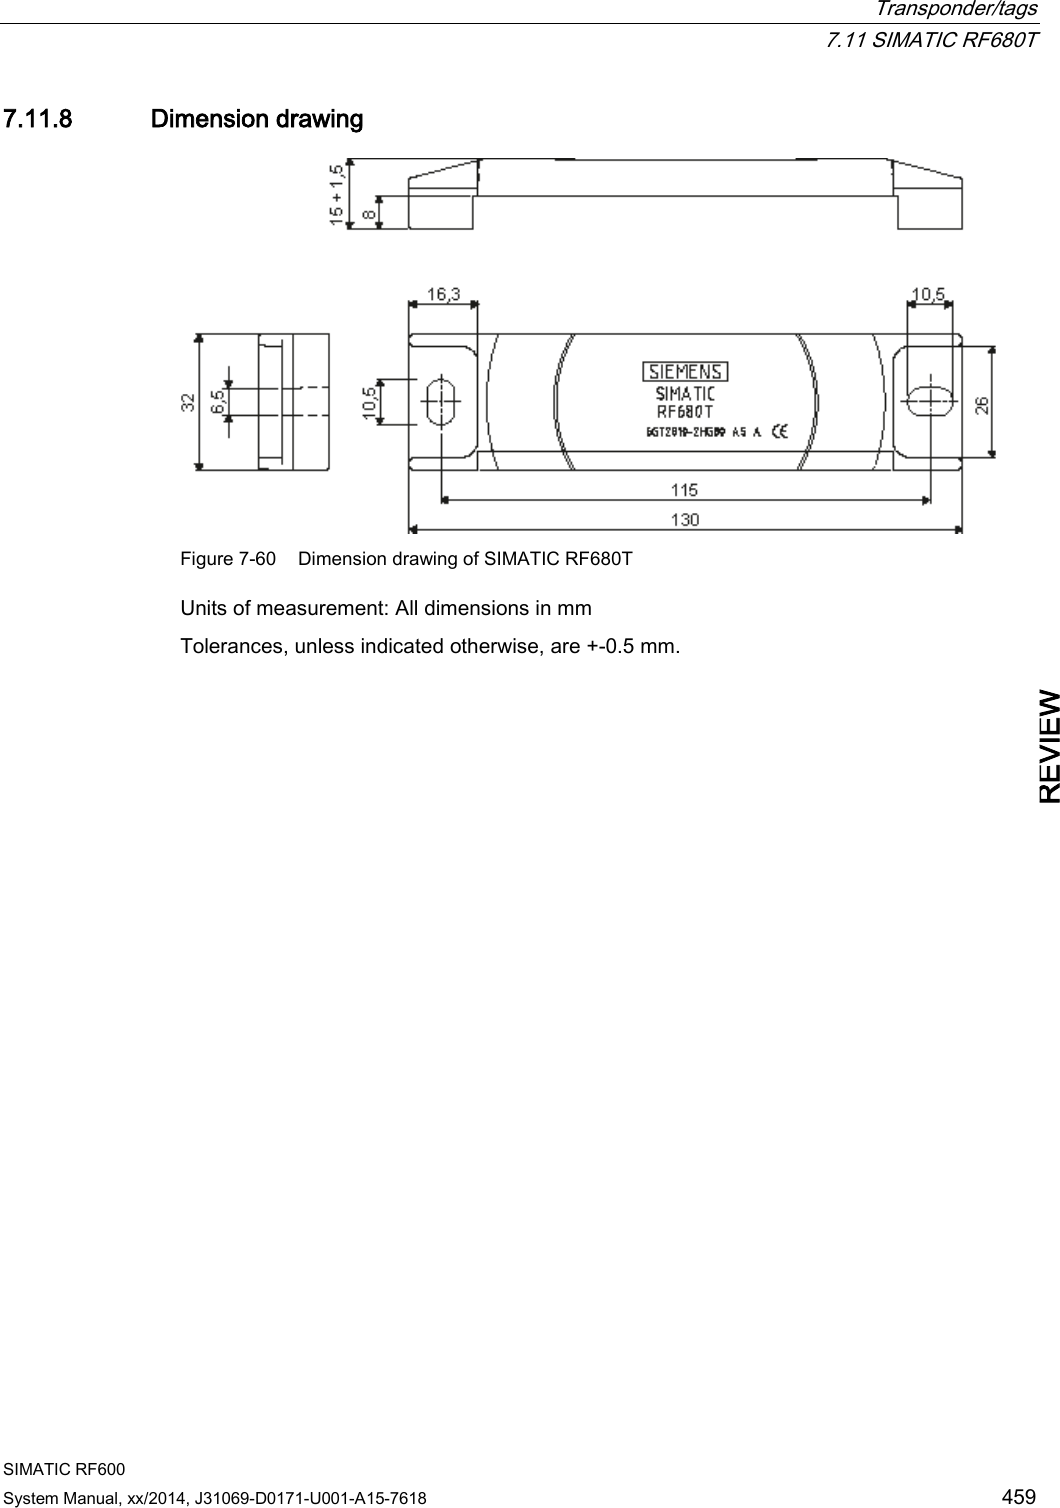  Transponder/tags  7.11 SIMATIC RF680T SIMATIC RF600 System Manual, xx/2014, J31069-D0171-U001-A15-7618 459 REVIEW 7.11.8 Dimension drawing  Figure 7-60 Dimension drawing of SIMATIC RF680T Units of measurement: All dimensions in mm Tolerances, unless indicated otherwise, are +-0.5 mm. 